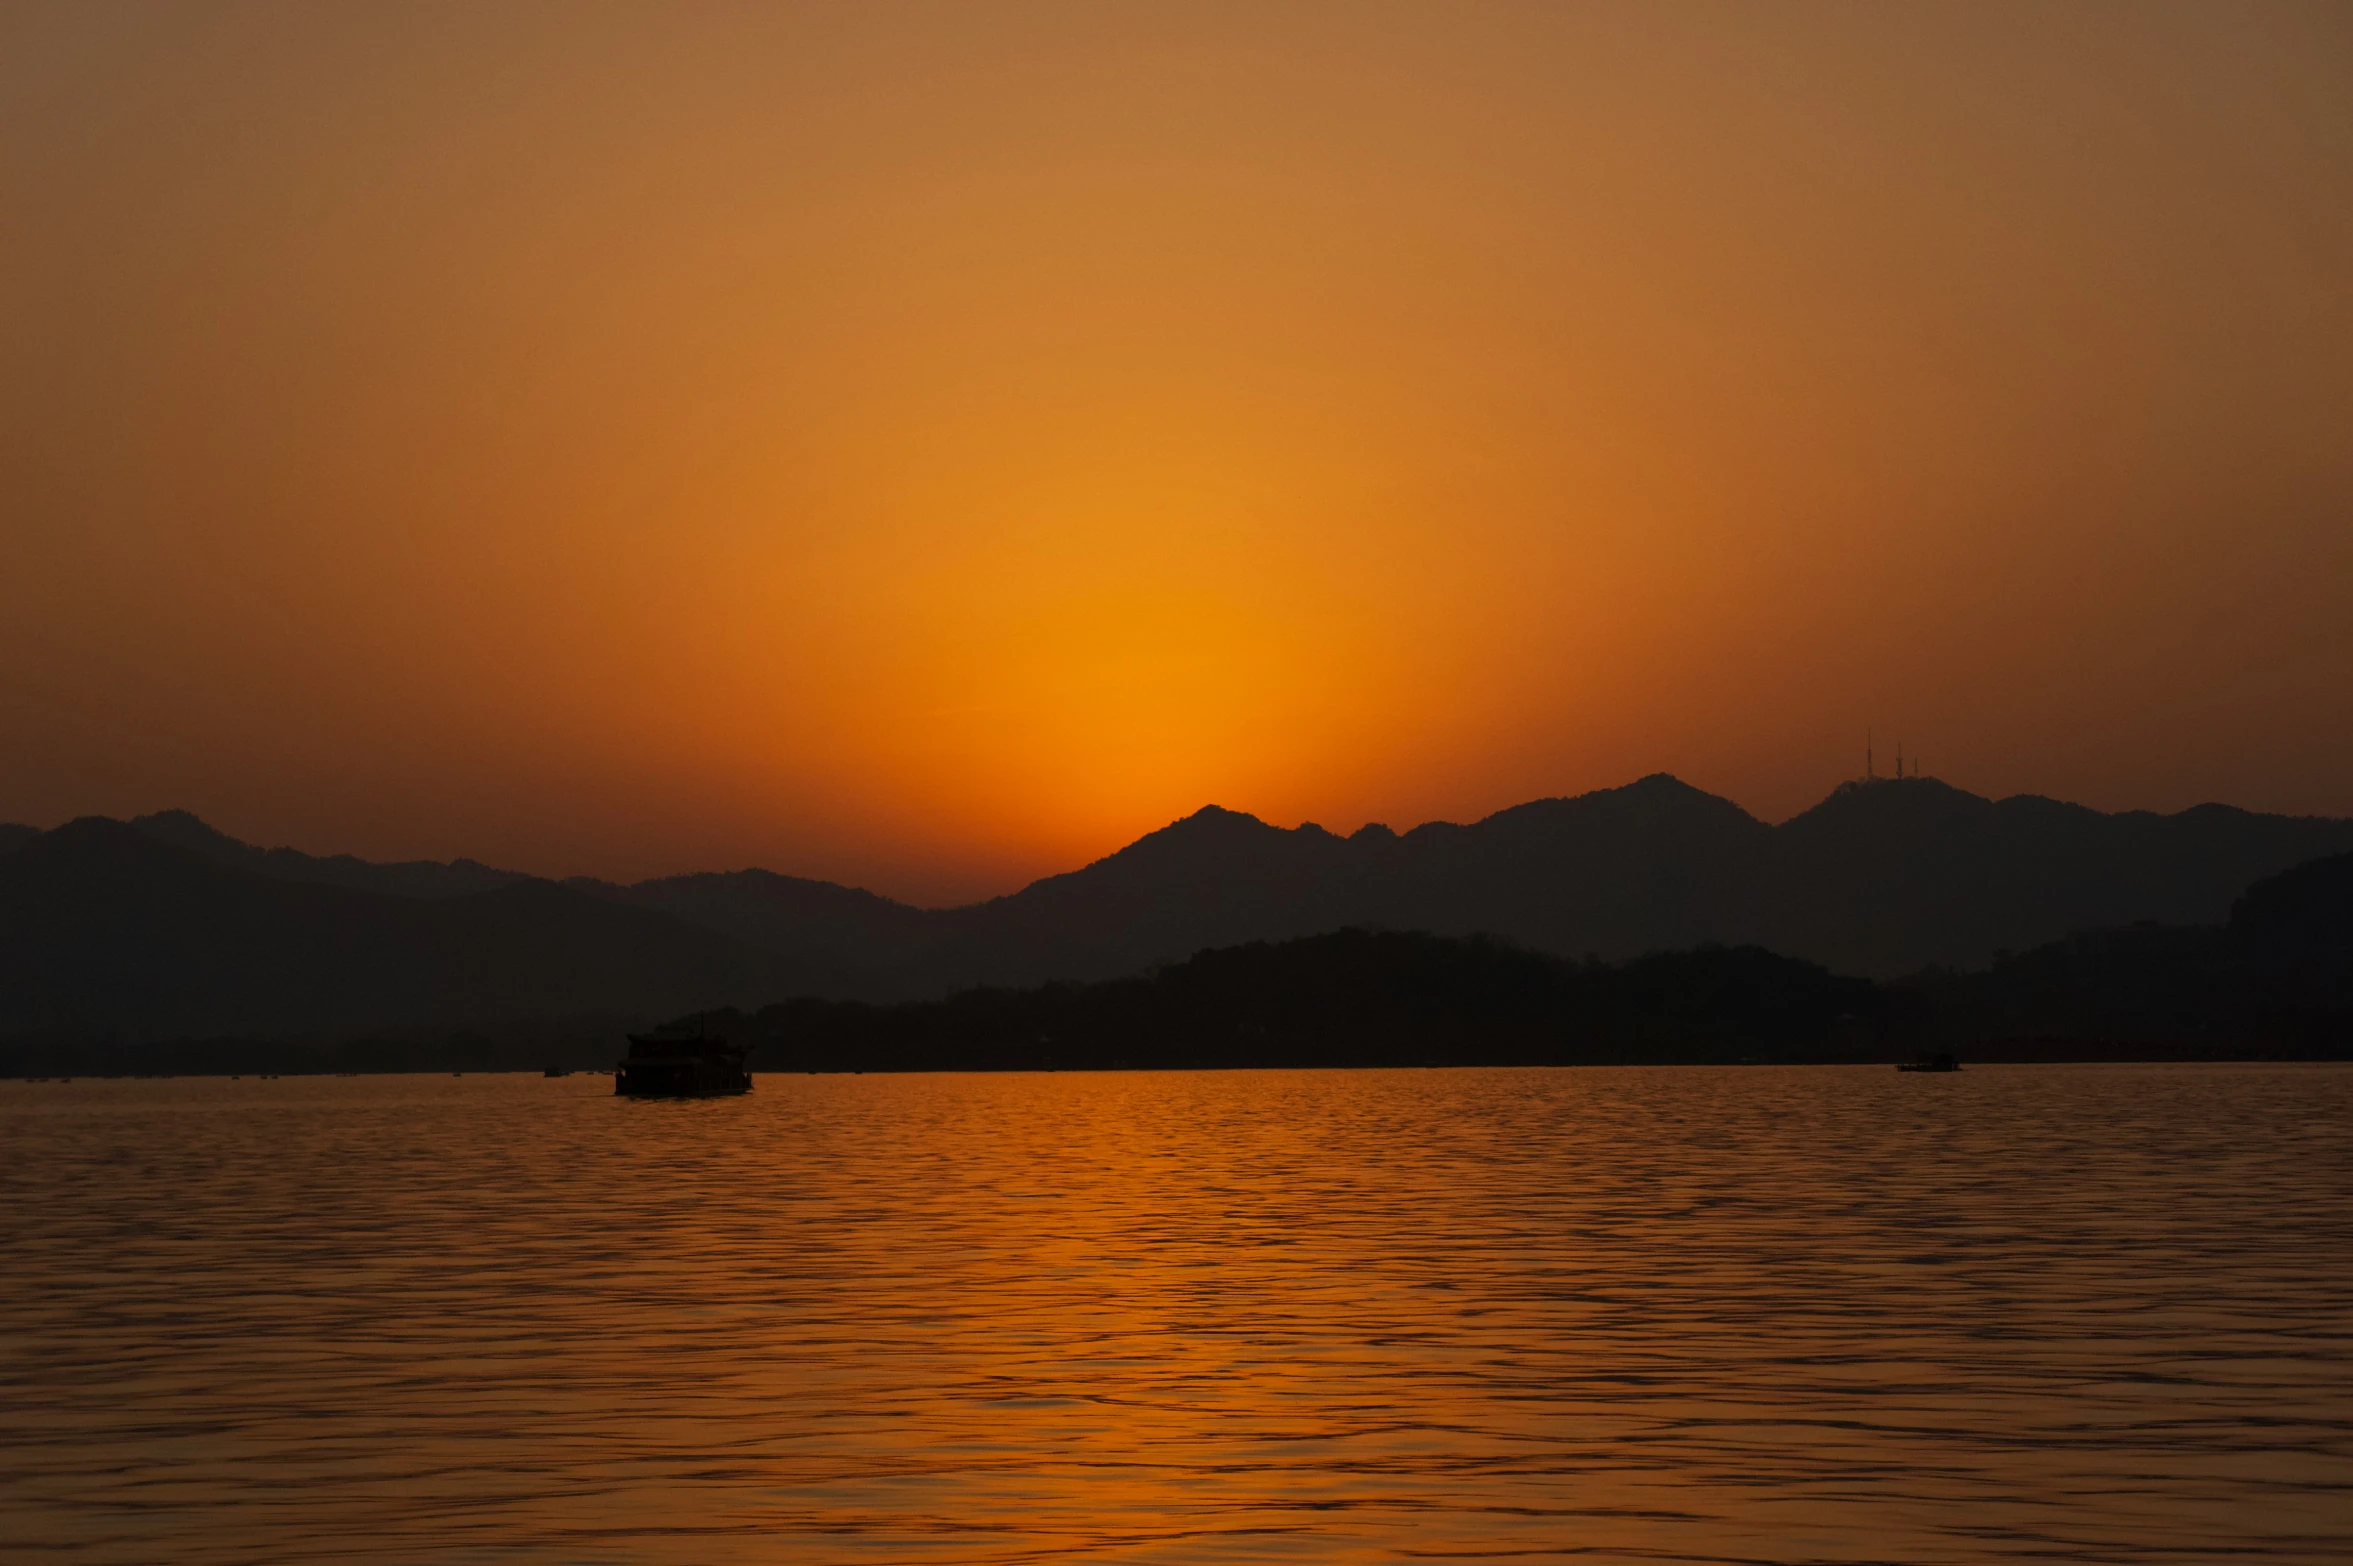 a beautiful sunset with the sun rising over mountains over the water